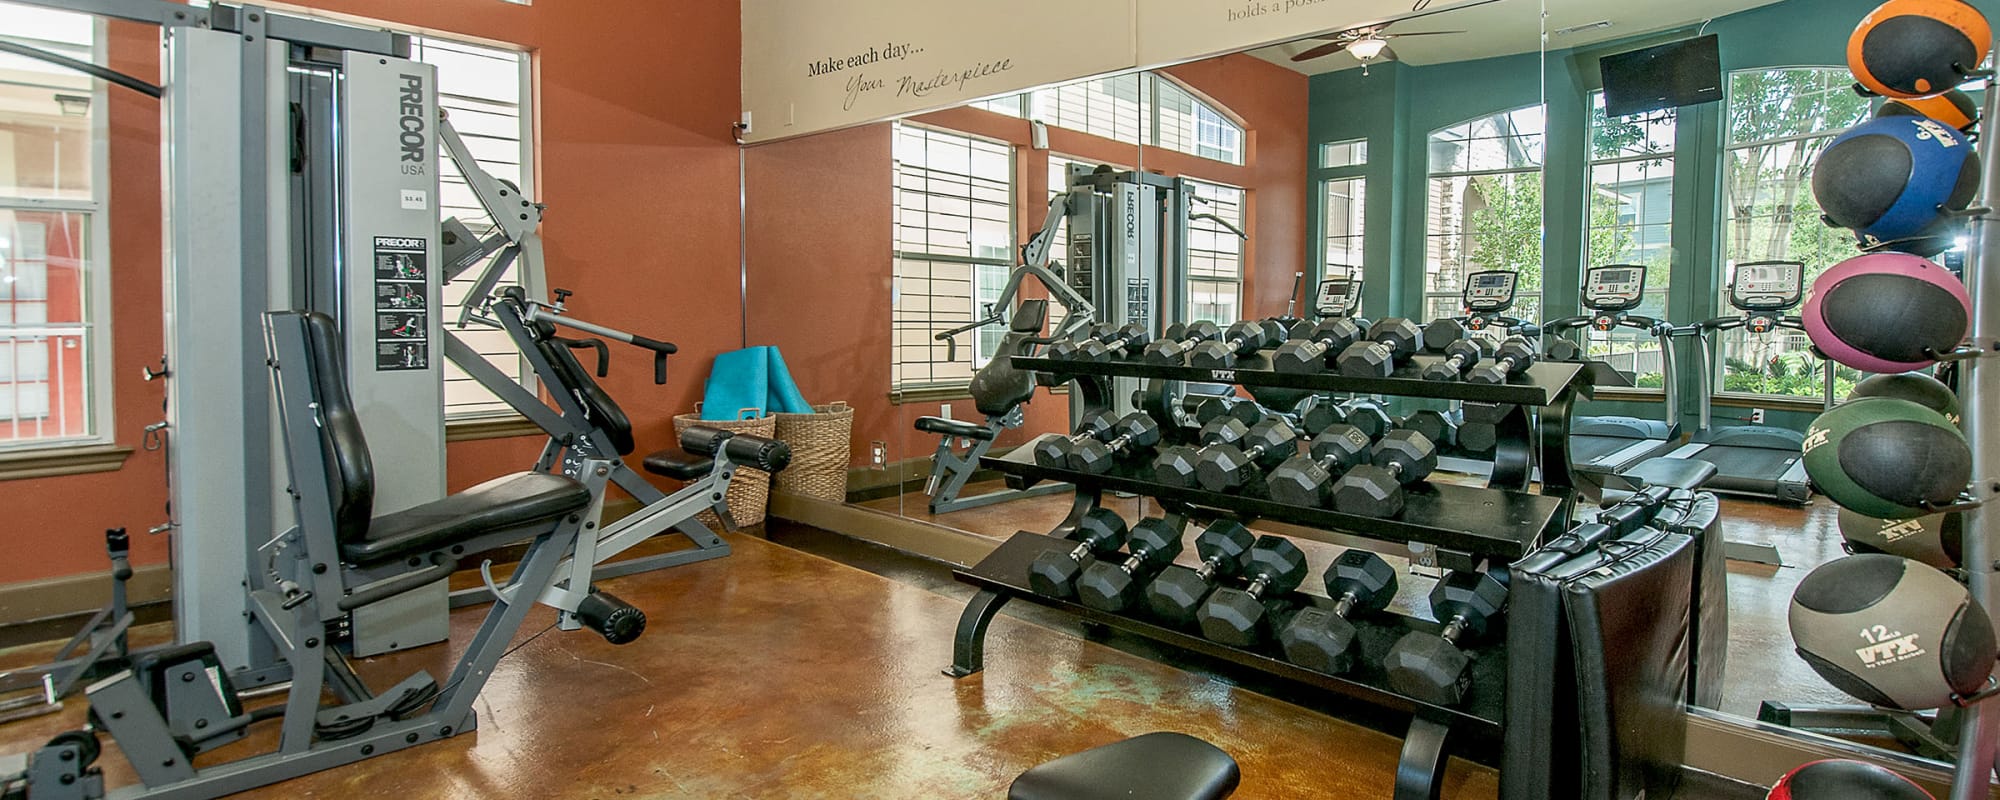 Fitness center at Sunrise Canyon in Universal City, Texas